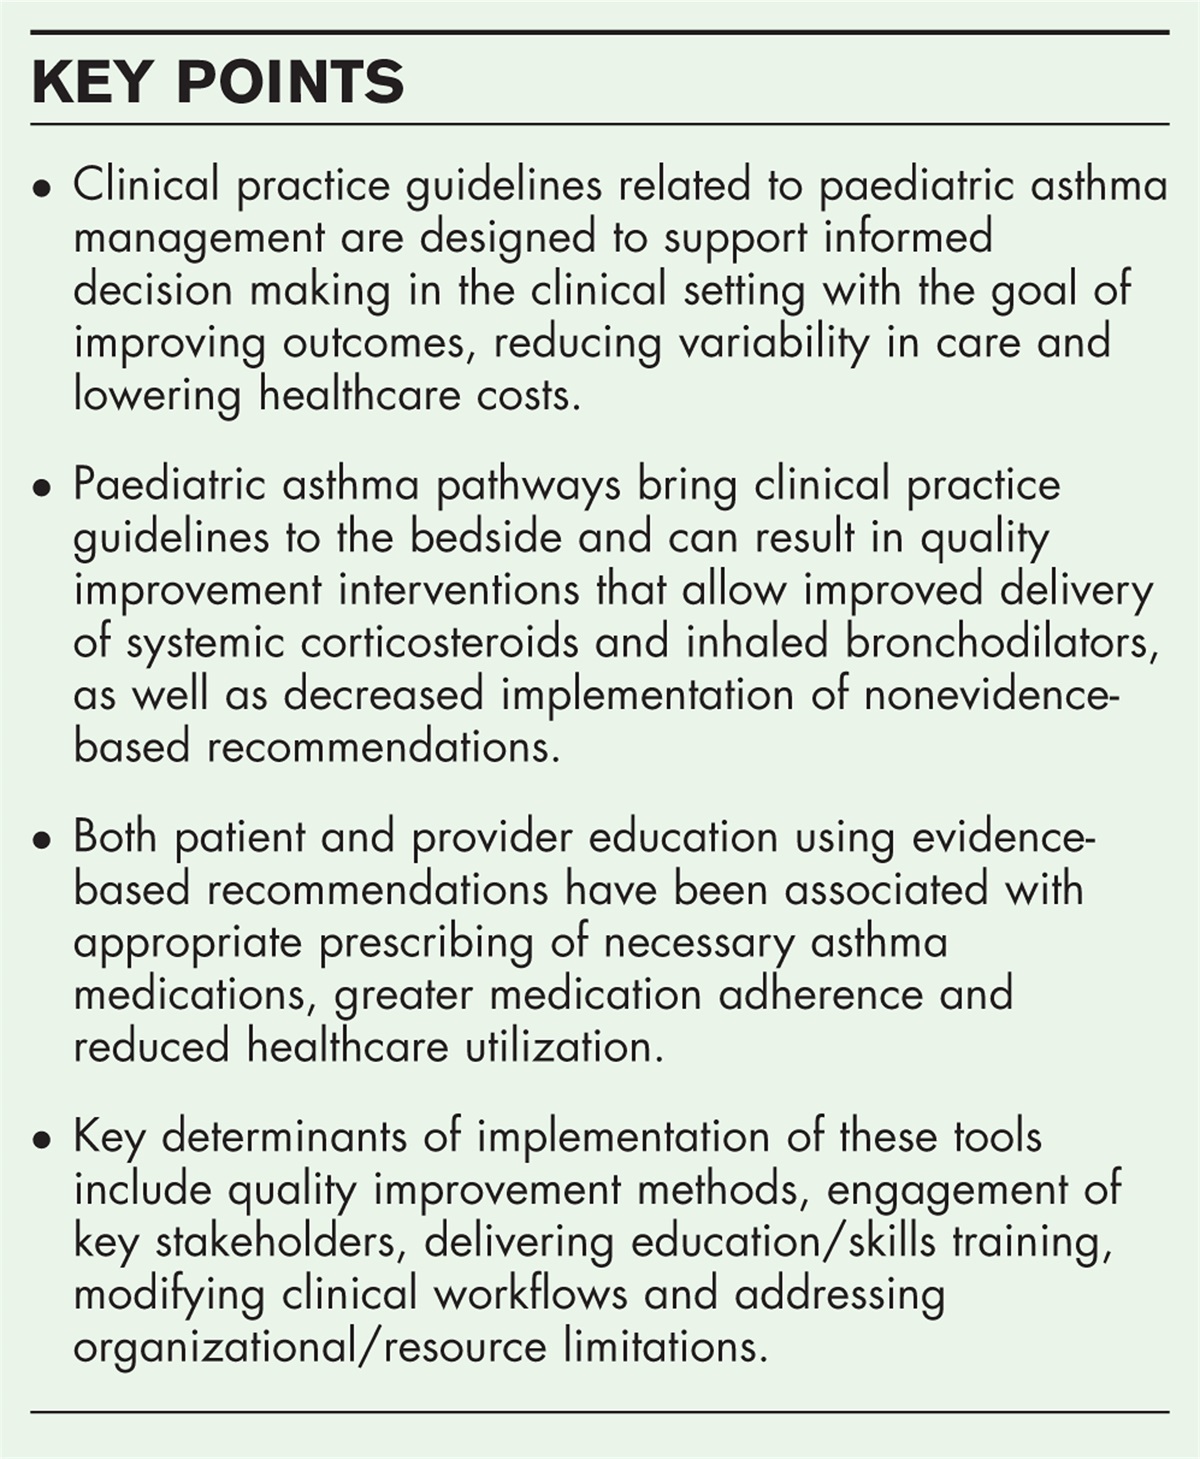 Quality improvement for paediatric asthma care in acute settings